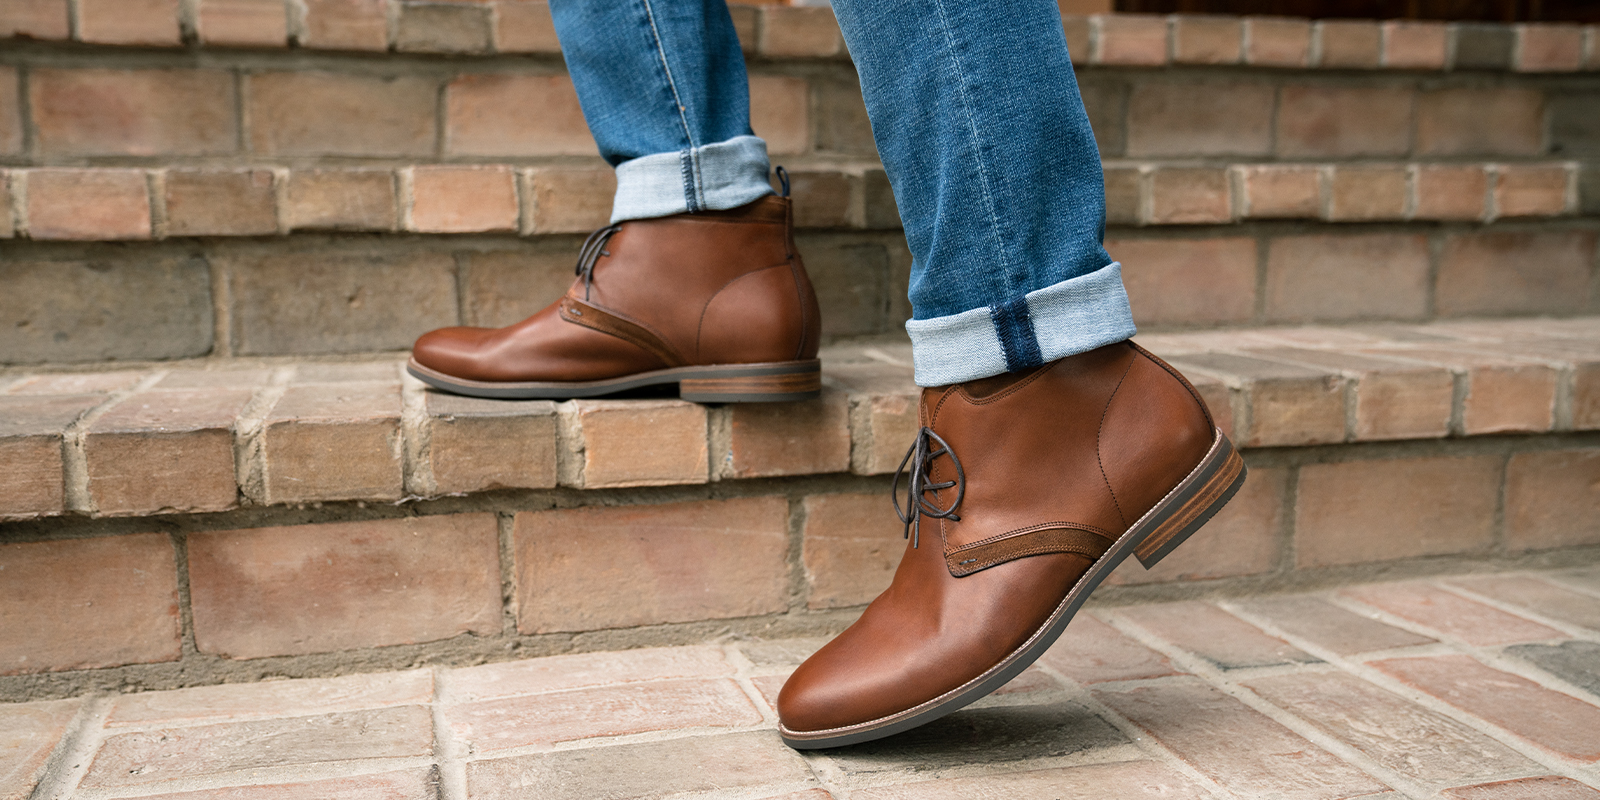 The featured image is the Uptown Plain Toe Chukka Boot in Cognac.